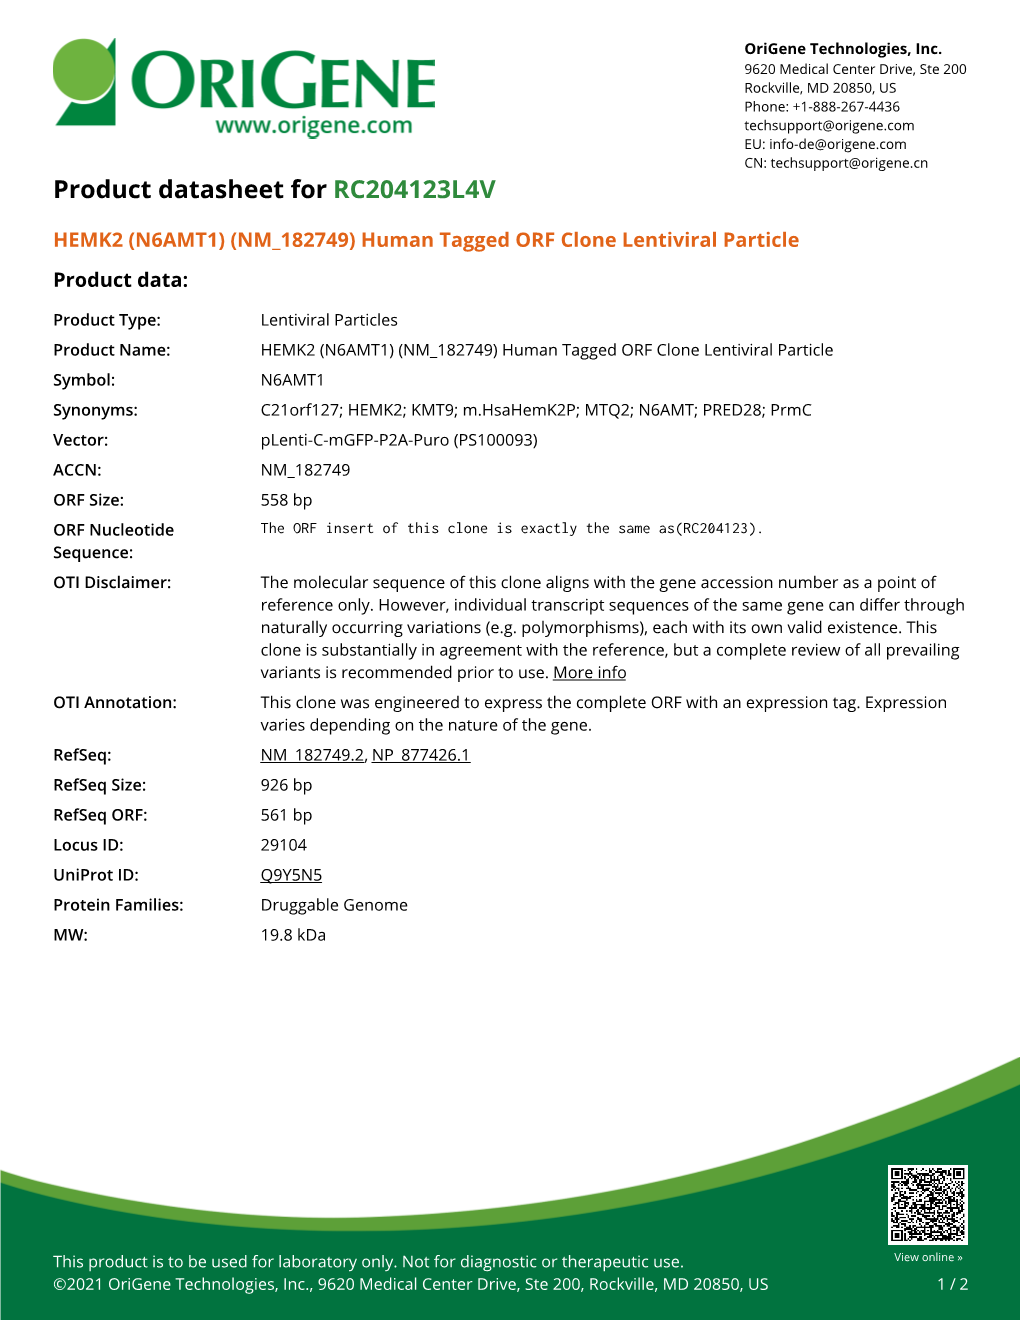 HEMK2 (N6AMT1) (NM 182749) Human Tagged ORF Clone Lentiviral Particle Product Data